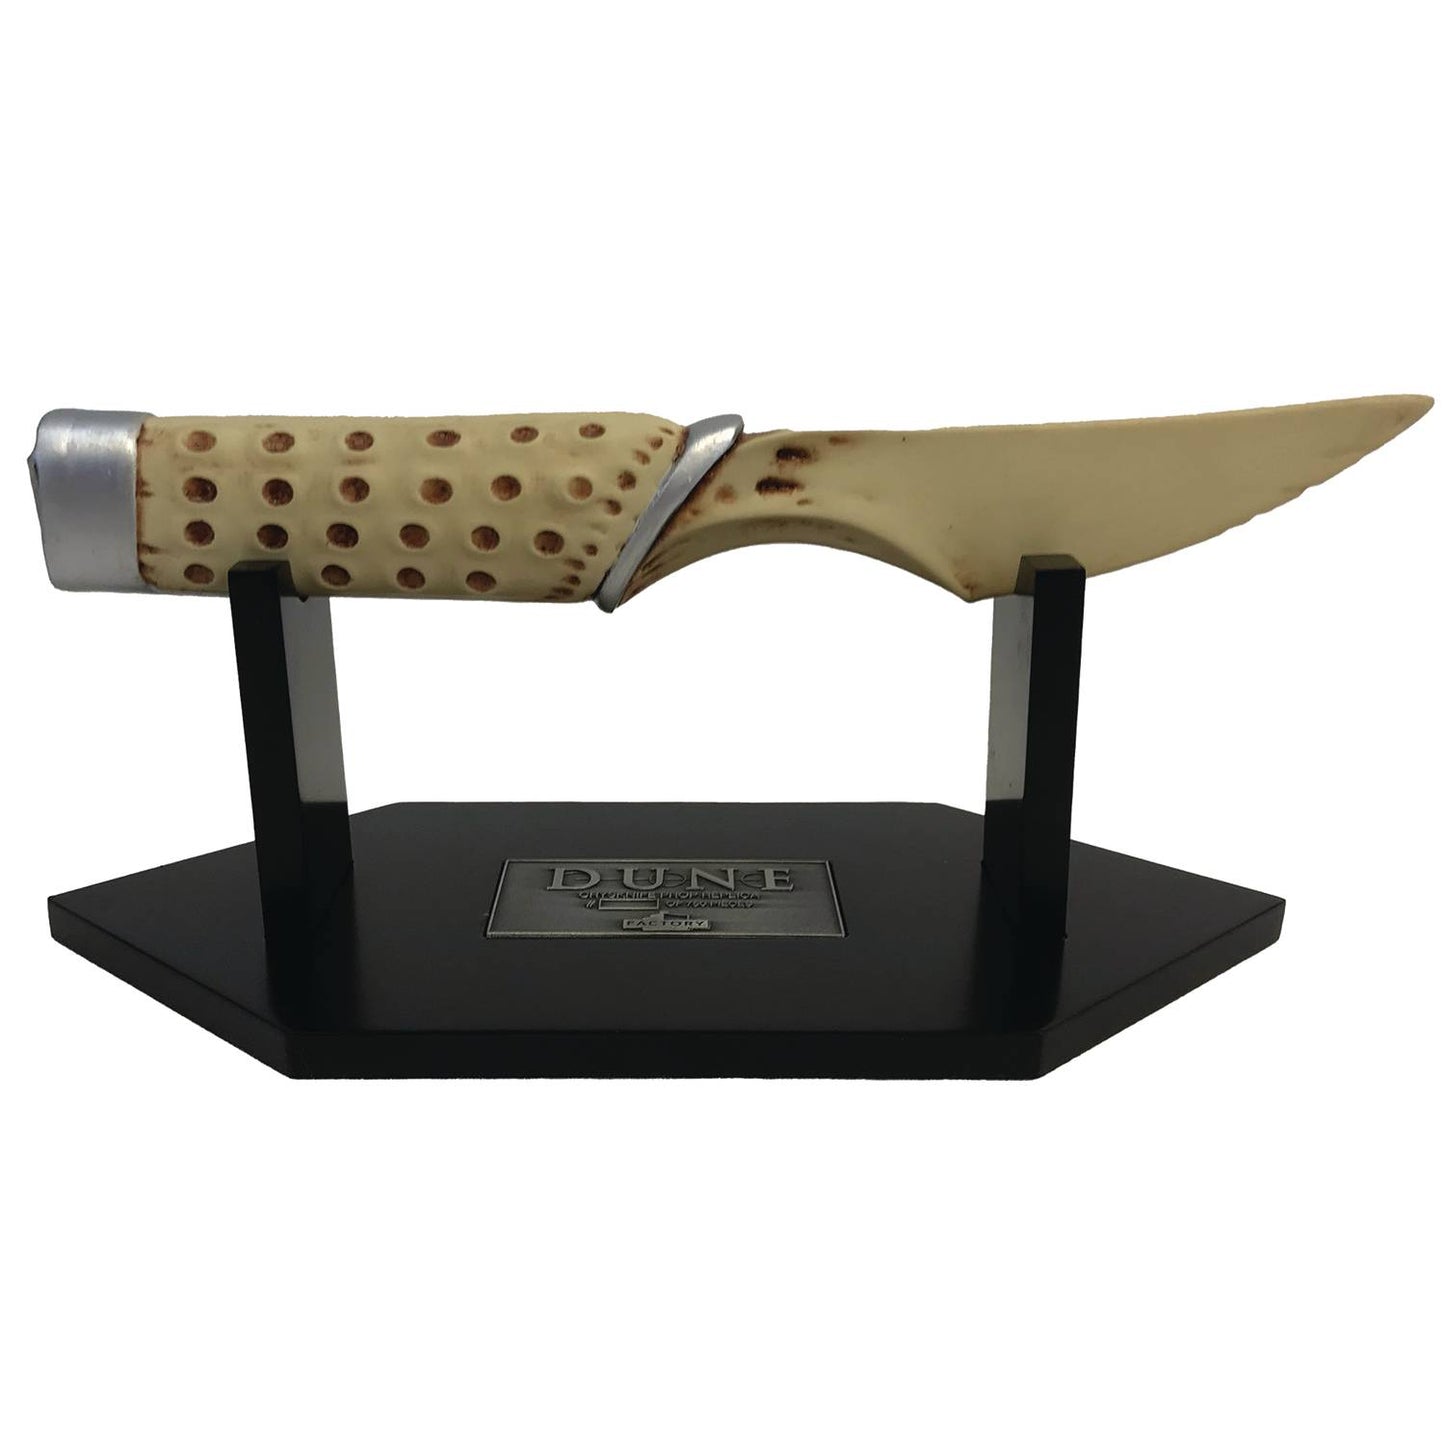 Factory Entertainment 1984 Dune Crysknife Limited Edition Prop Replica